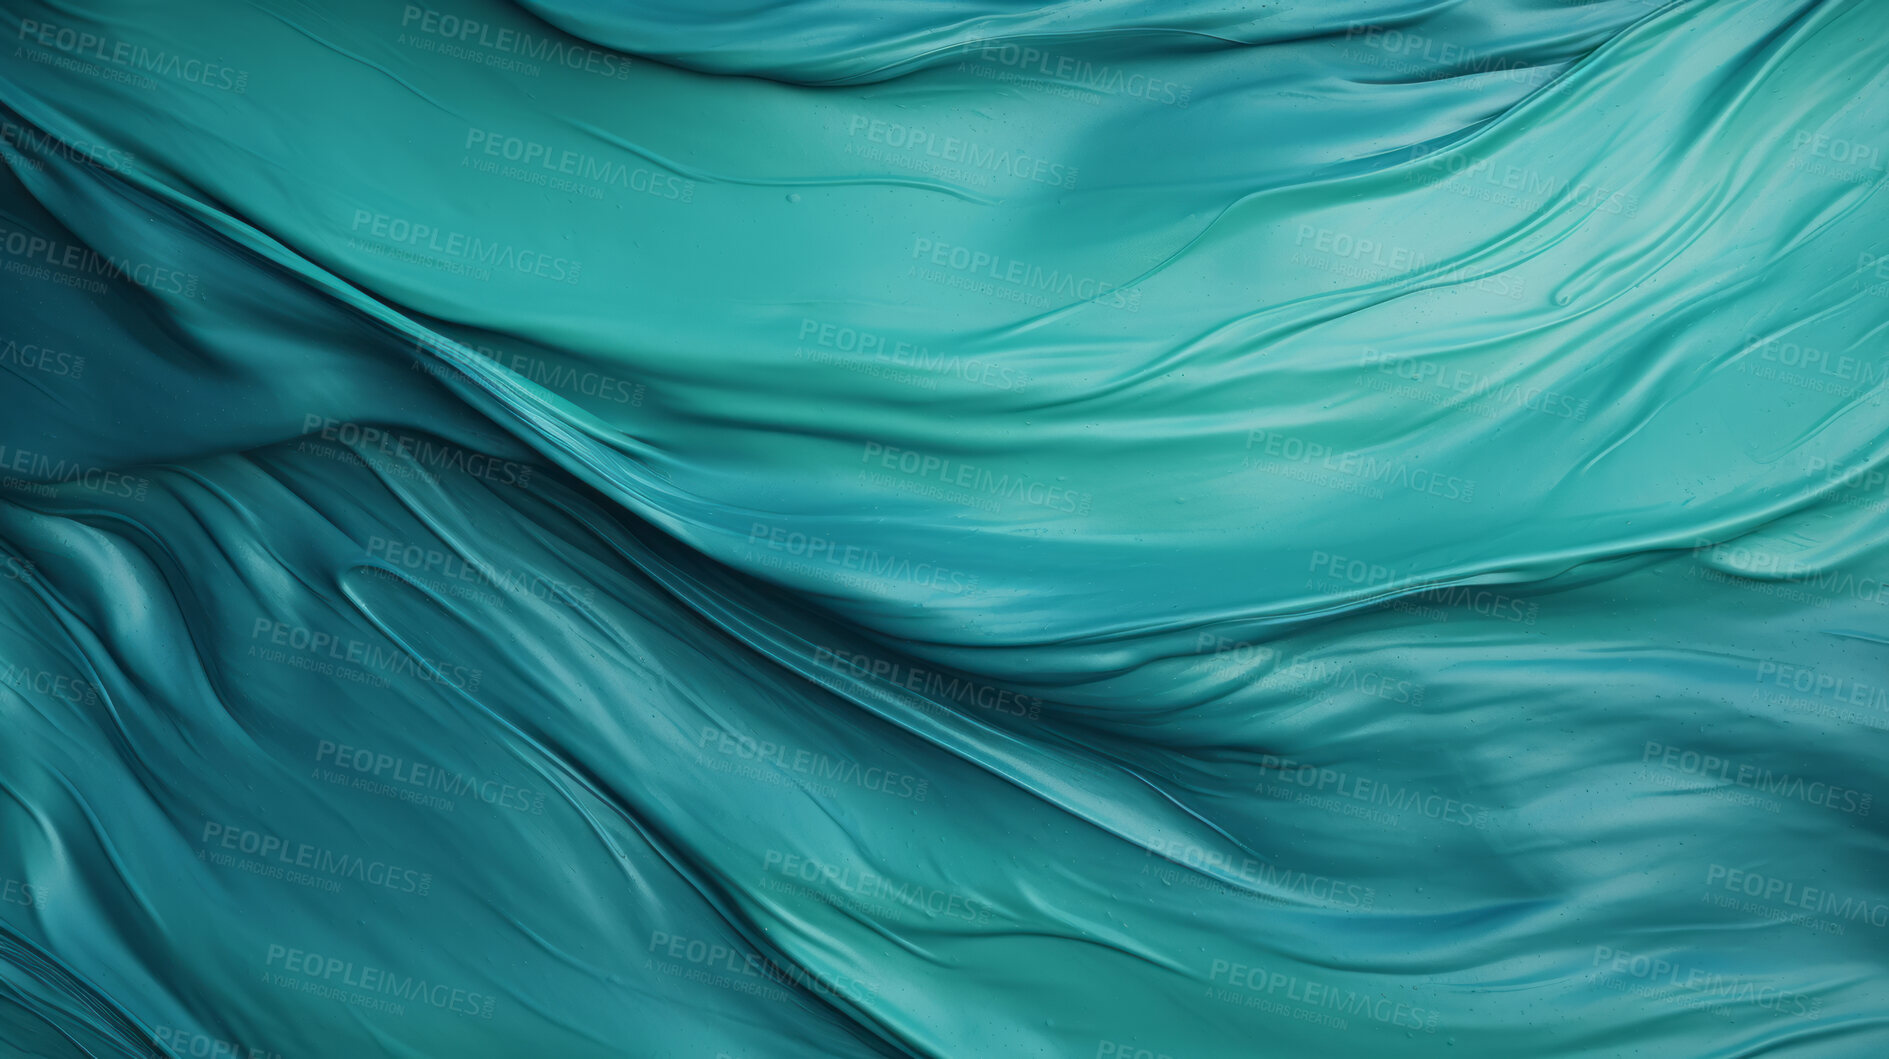 Buy stock photo Teal smooth paint texture close-up. Swirl abstract background.